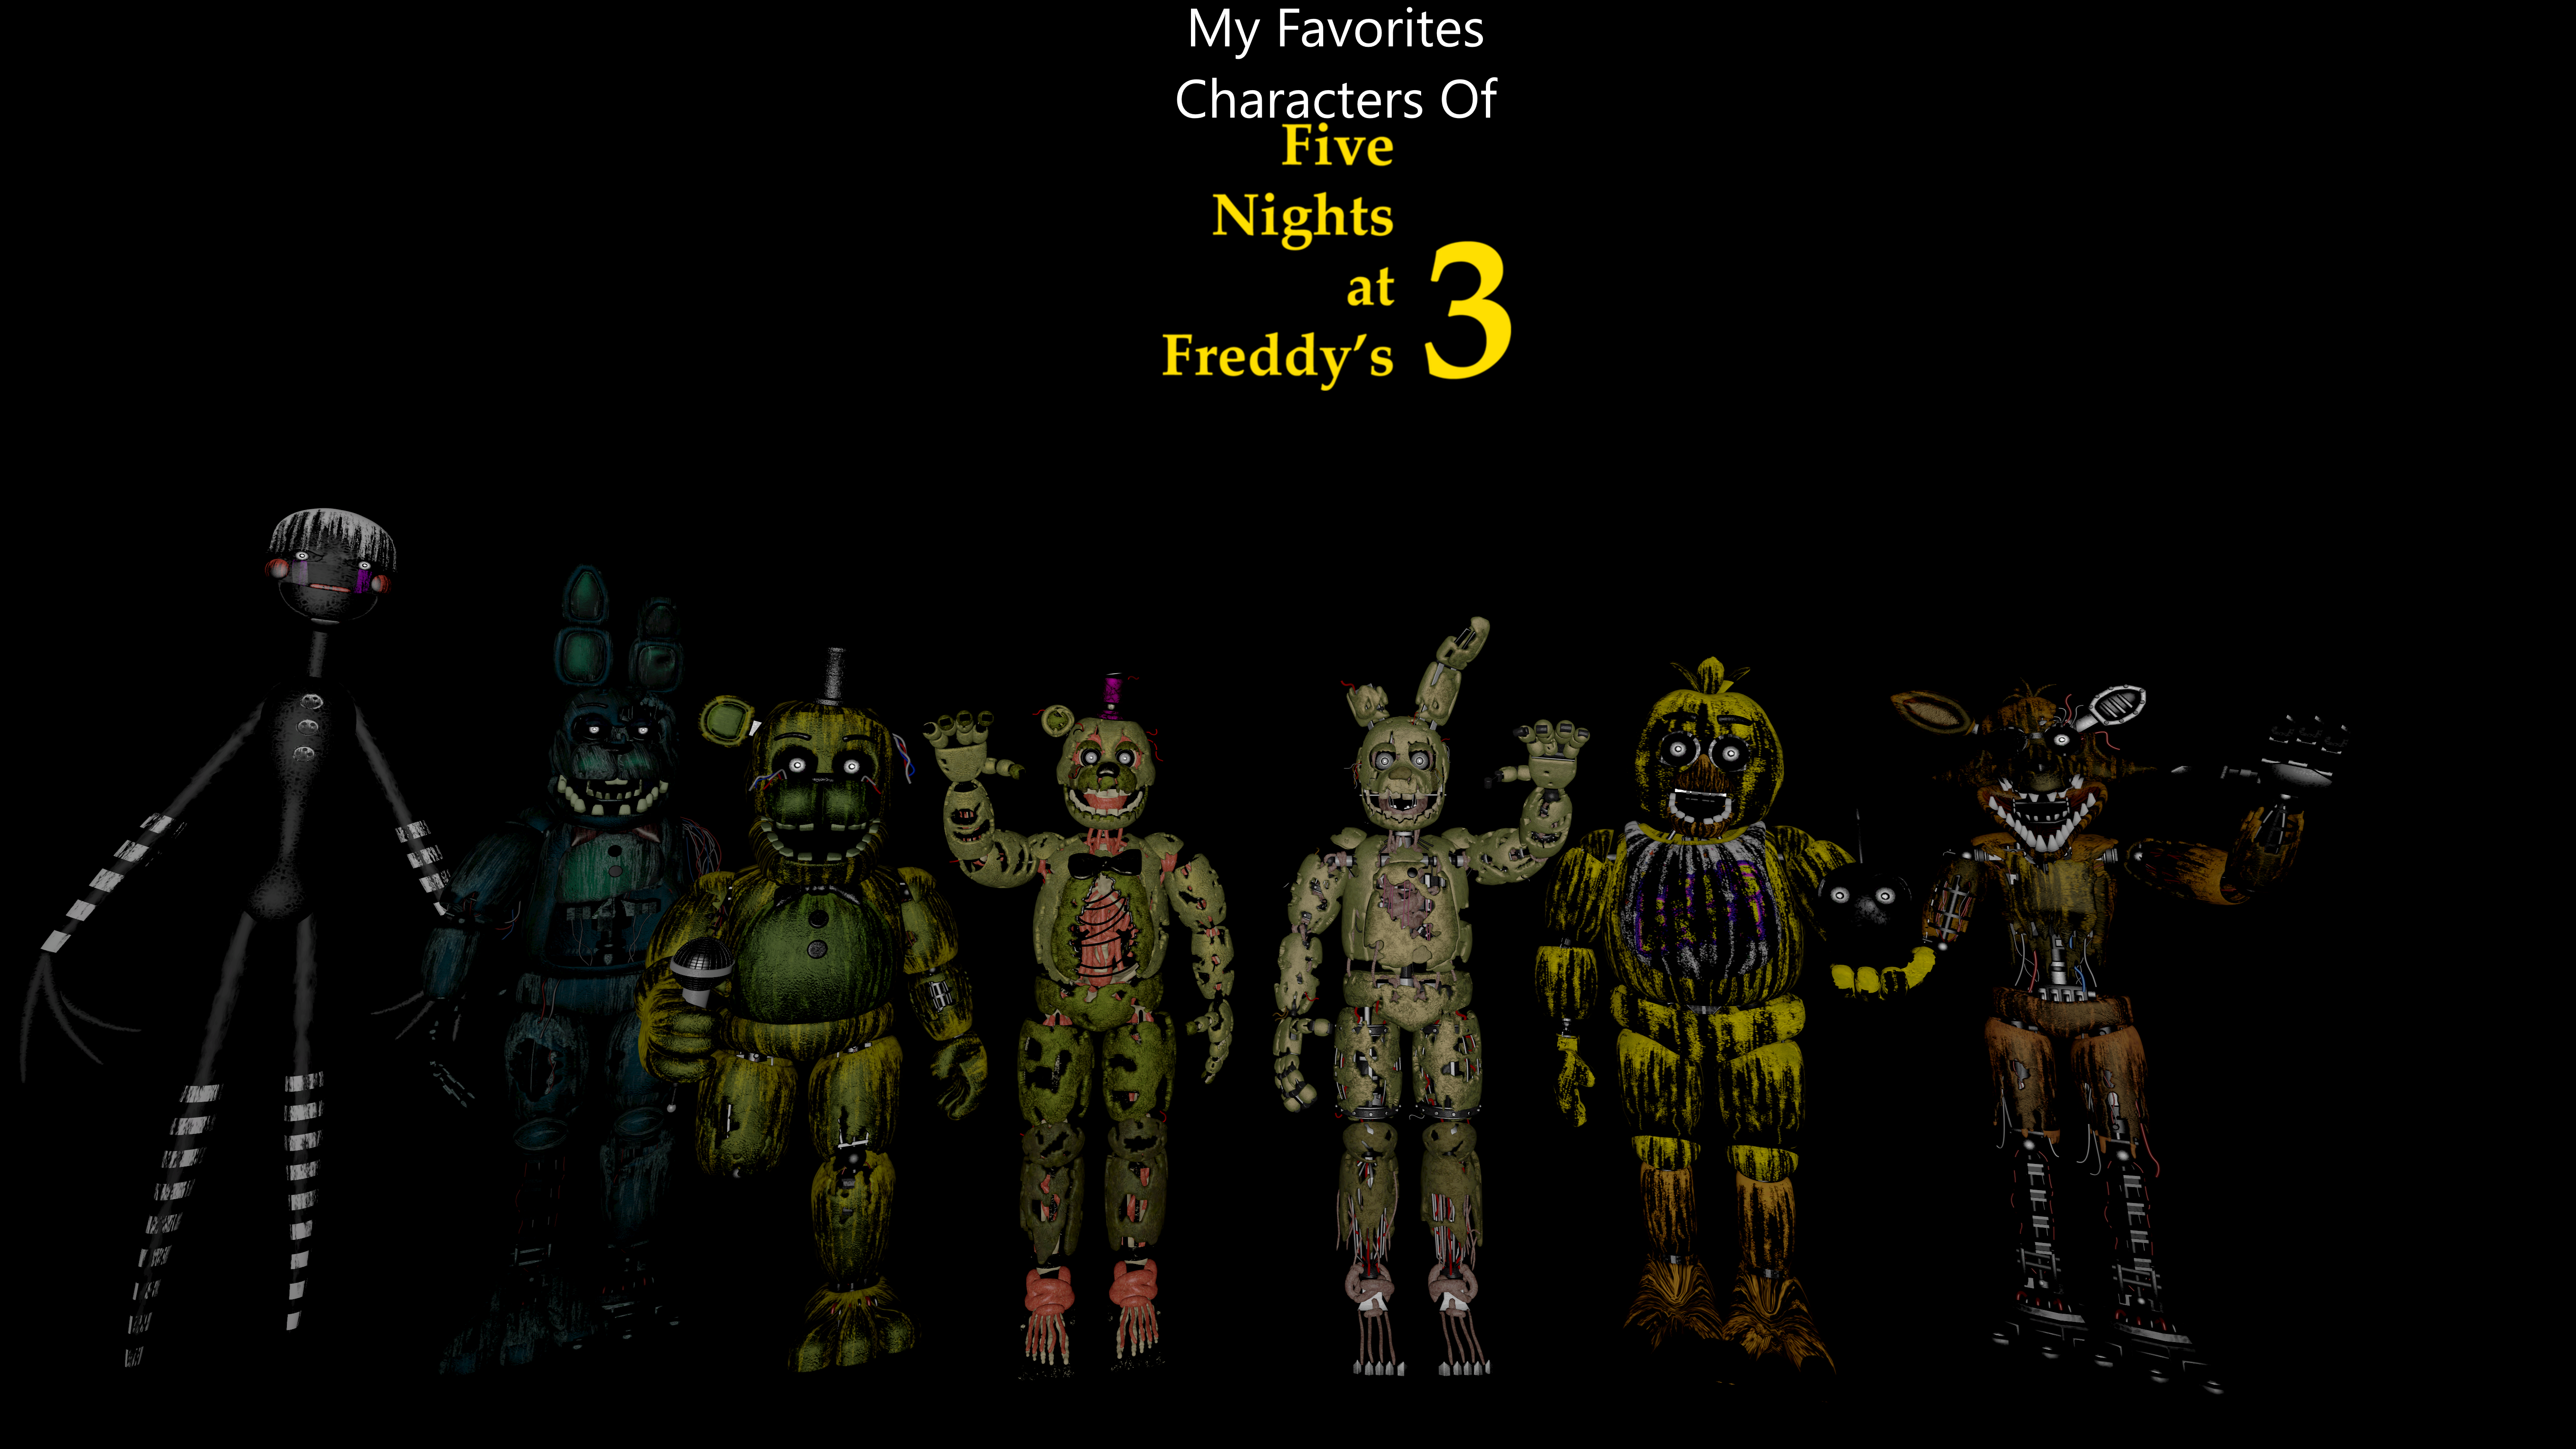 FNAF (10 Games and 9 Years) Happy Anniversary by CoolTeen15 on DeviantArt